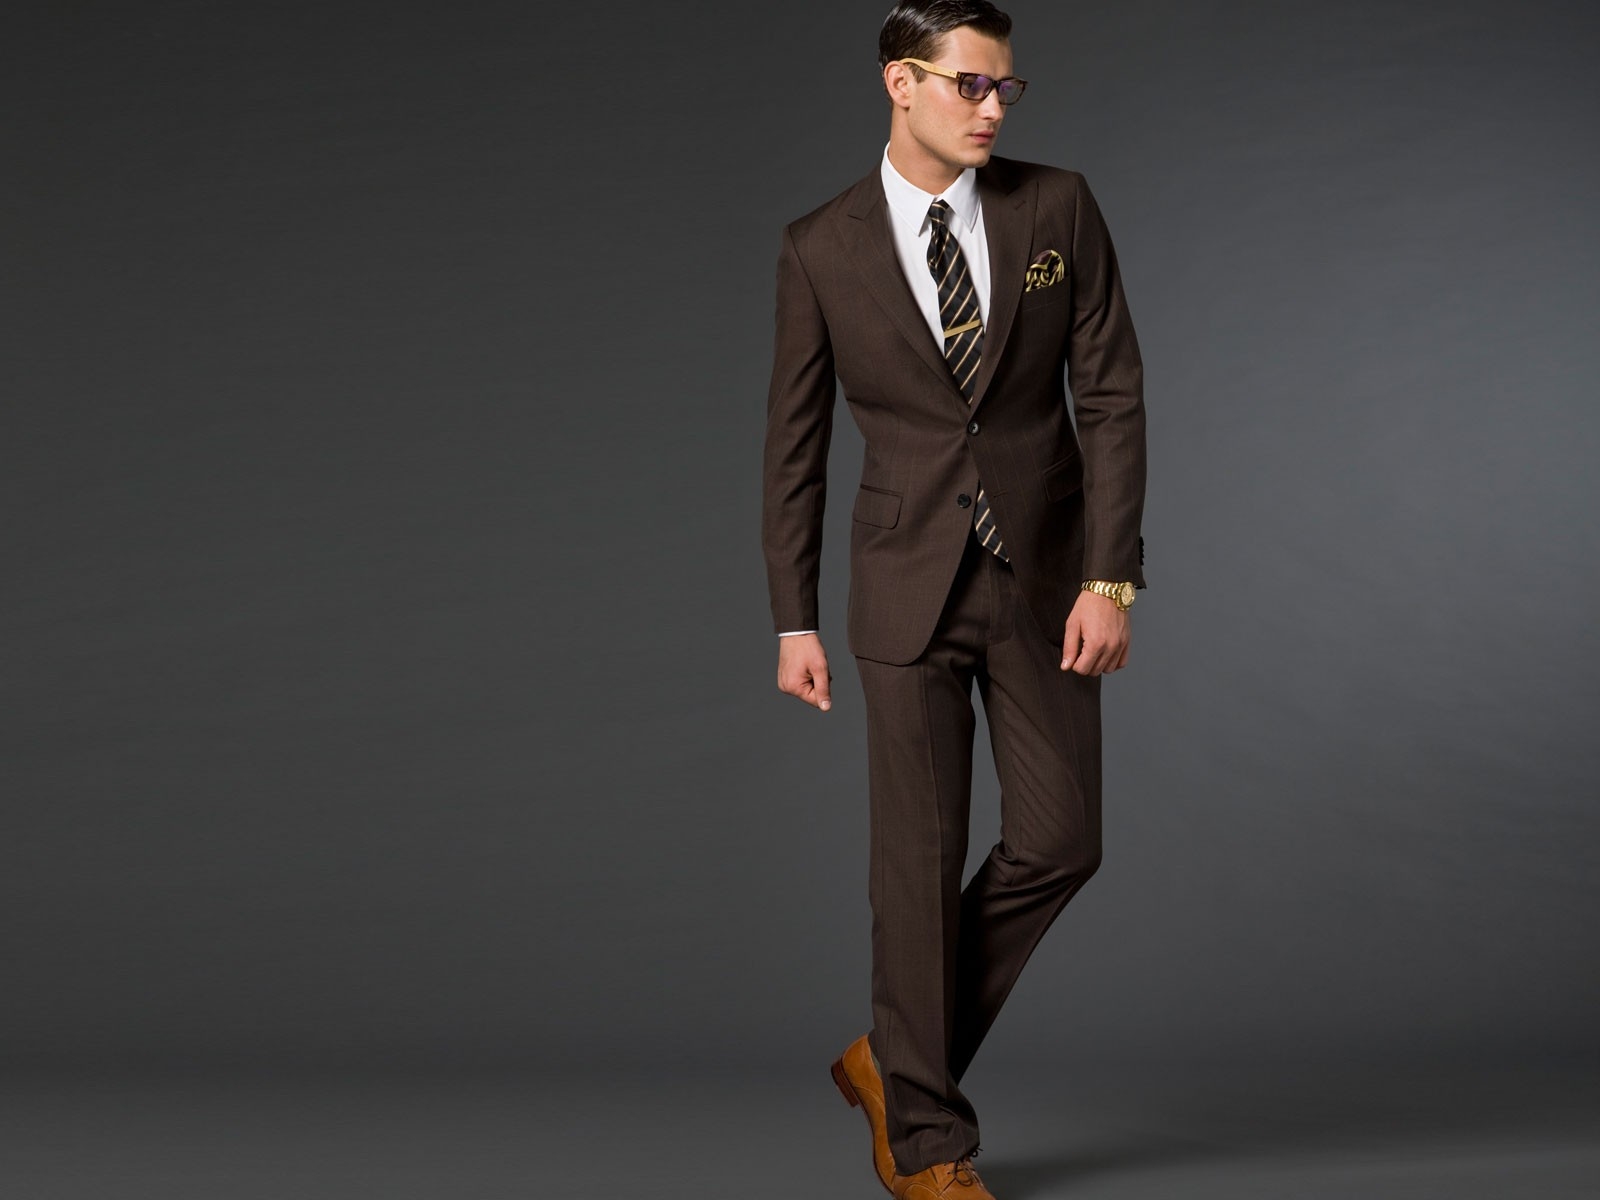 Color Struggles With Suits - Suits Expert